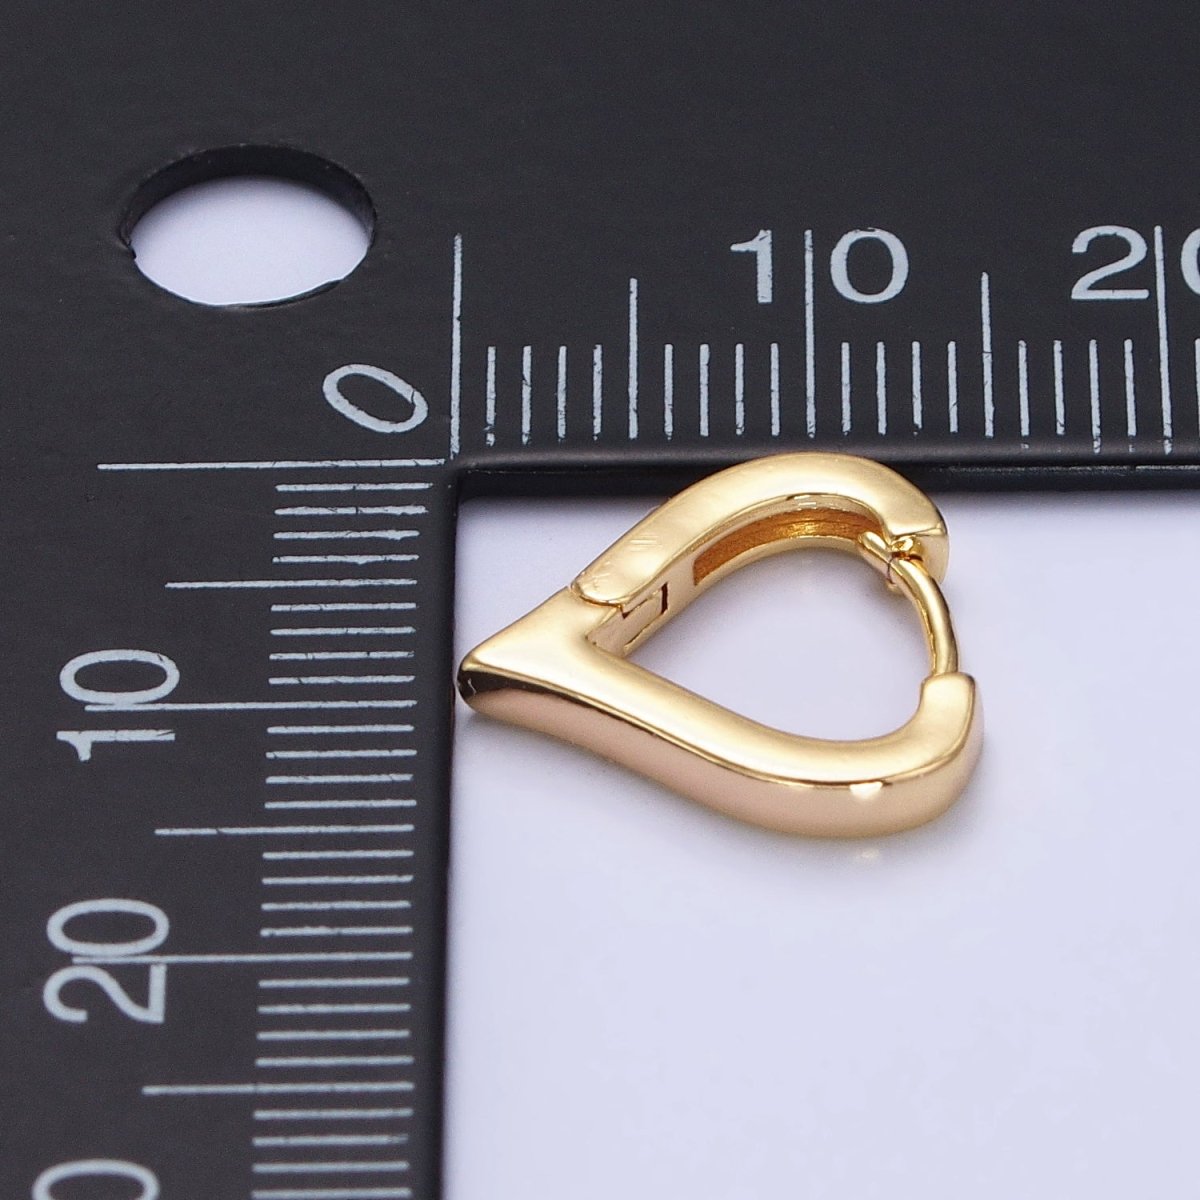 Gold, Silver 14mm Heart Triangle Flat Huggie Cartilage Hoop Earrings | AB516 AB524 - DLUXCA